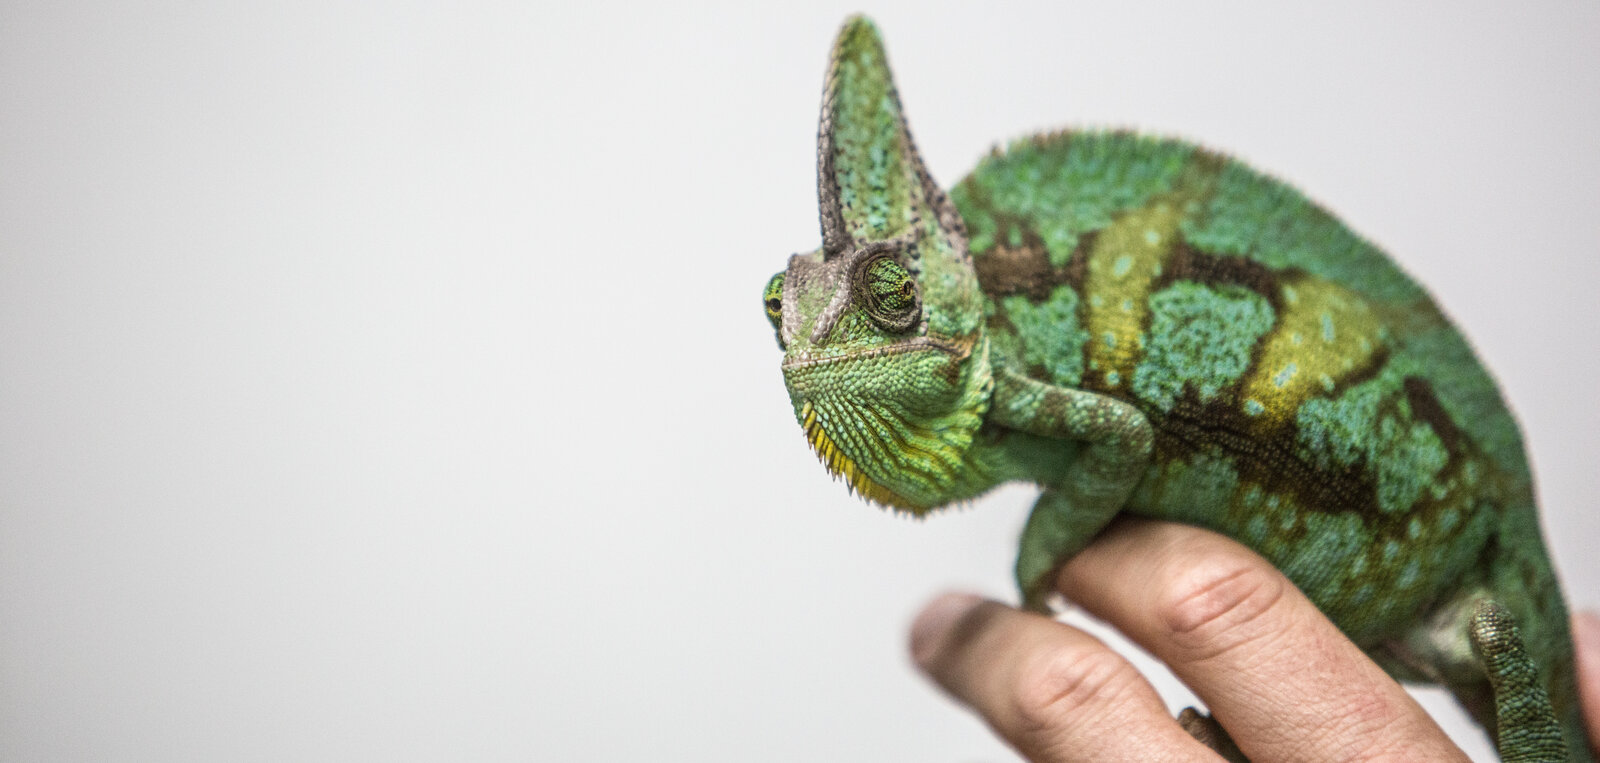 A photo of a man's hand holding a green chameleon 